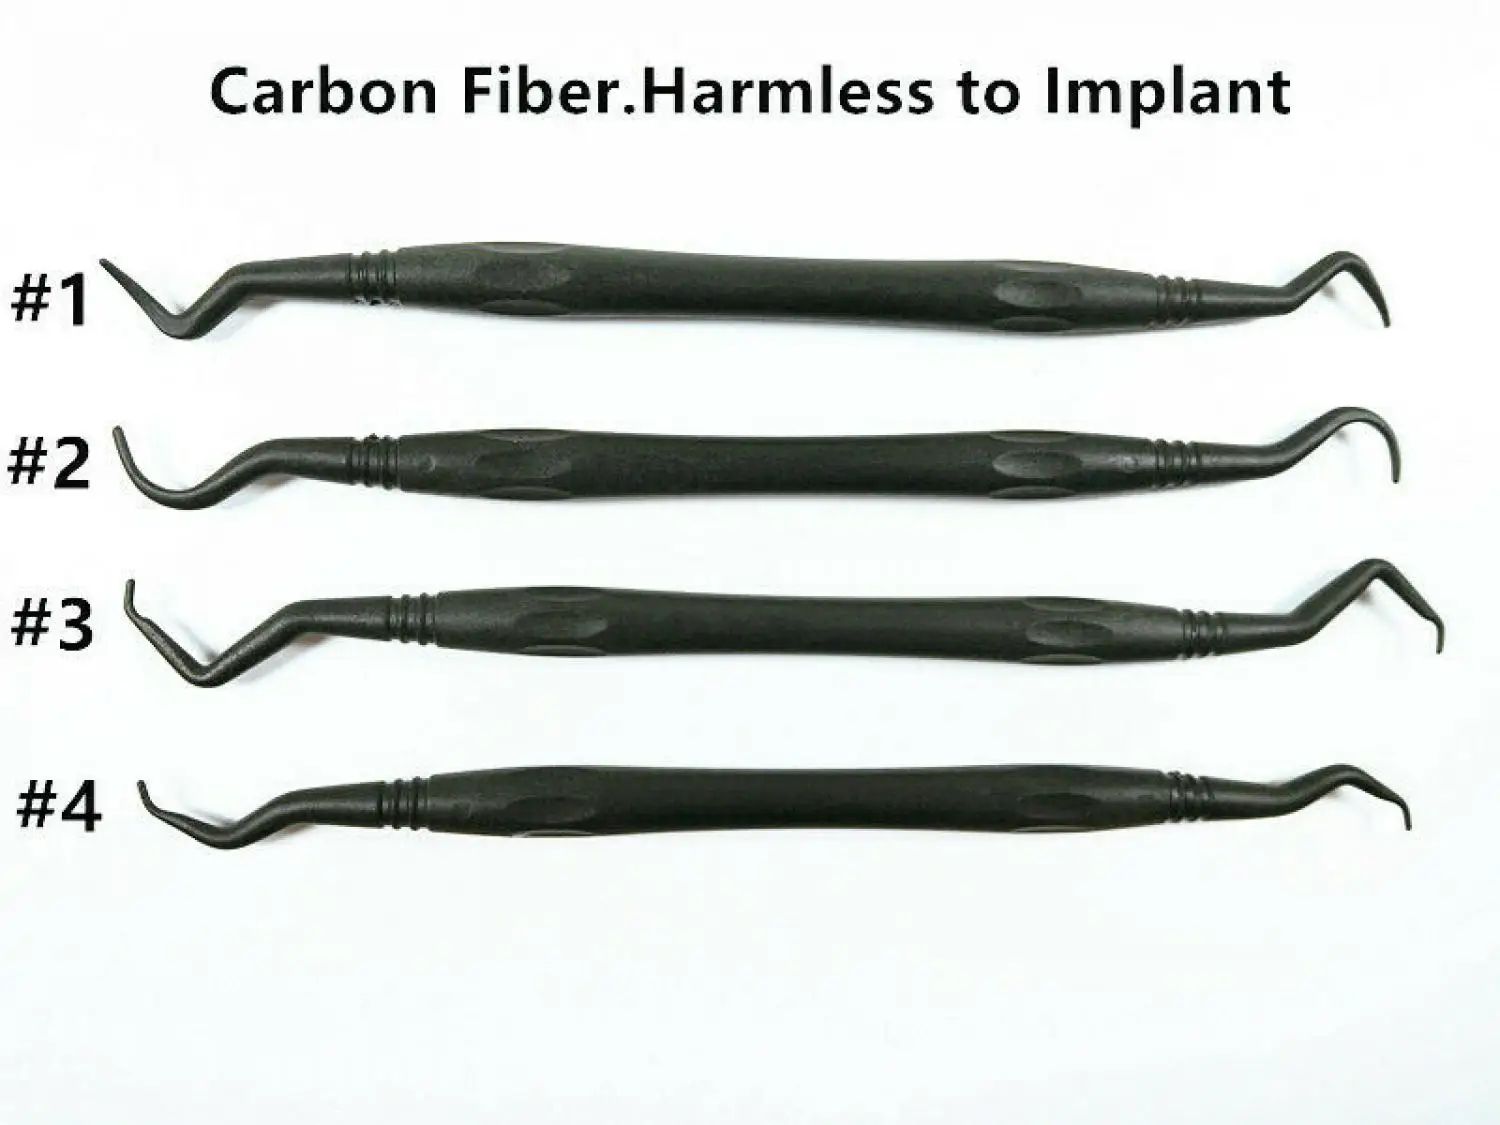 

4pcs/Lot Dental Carbon Fibre Implant Scaling Scaler Periodental Cleaner NoHarmTo Implants 134